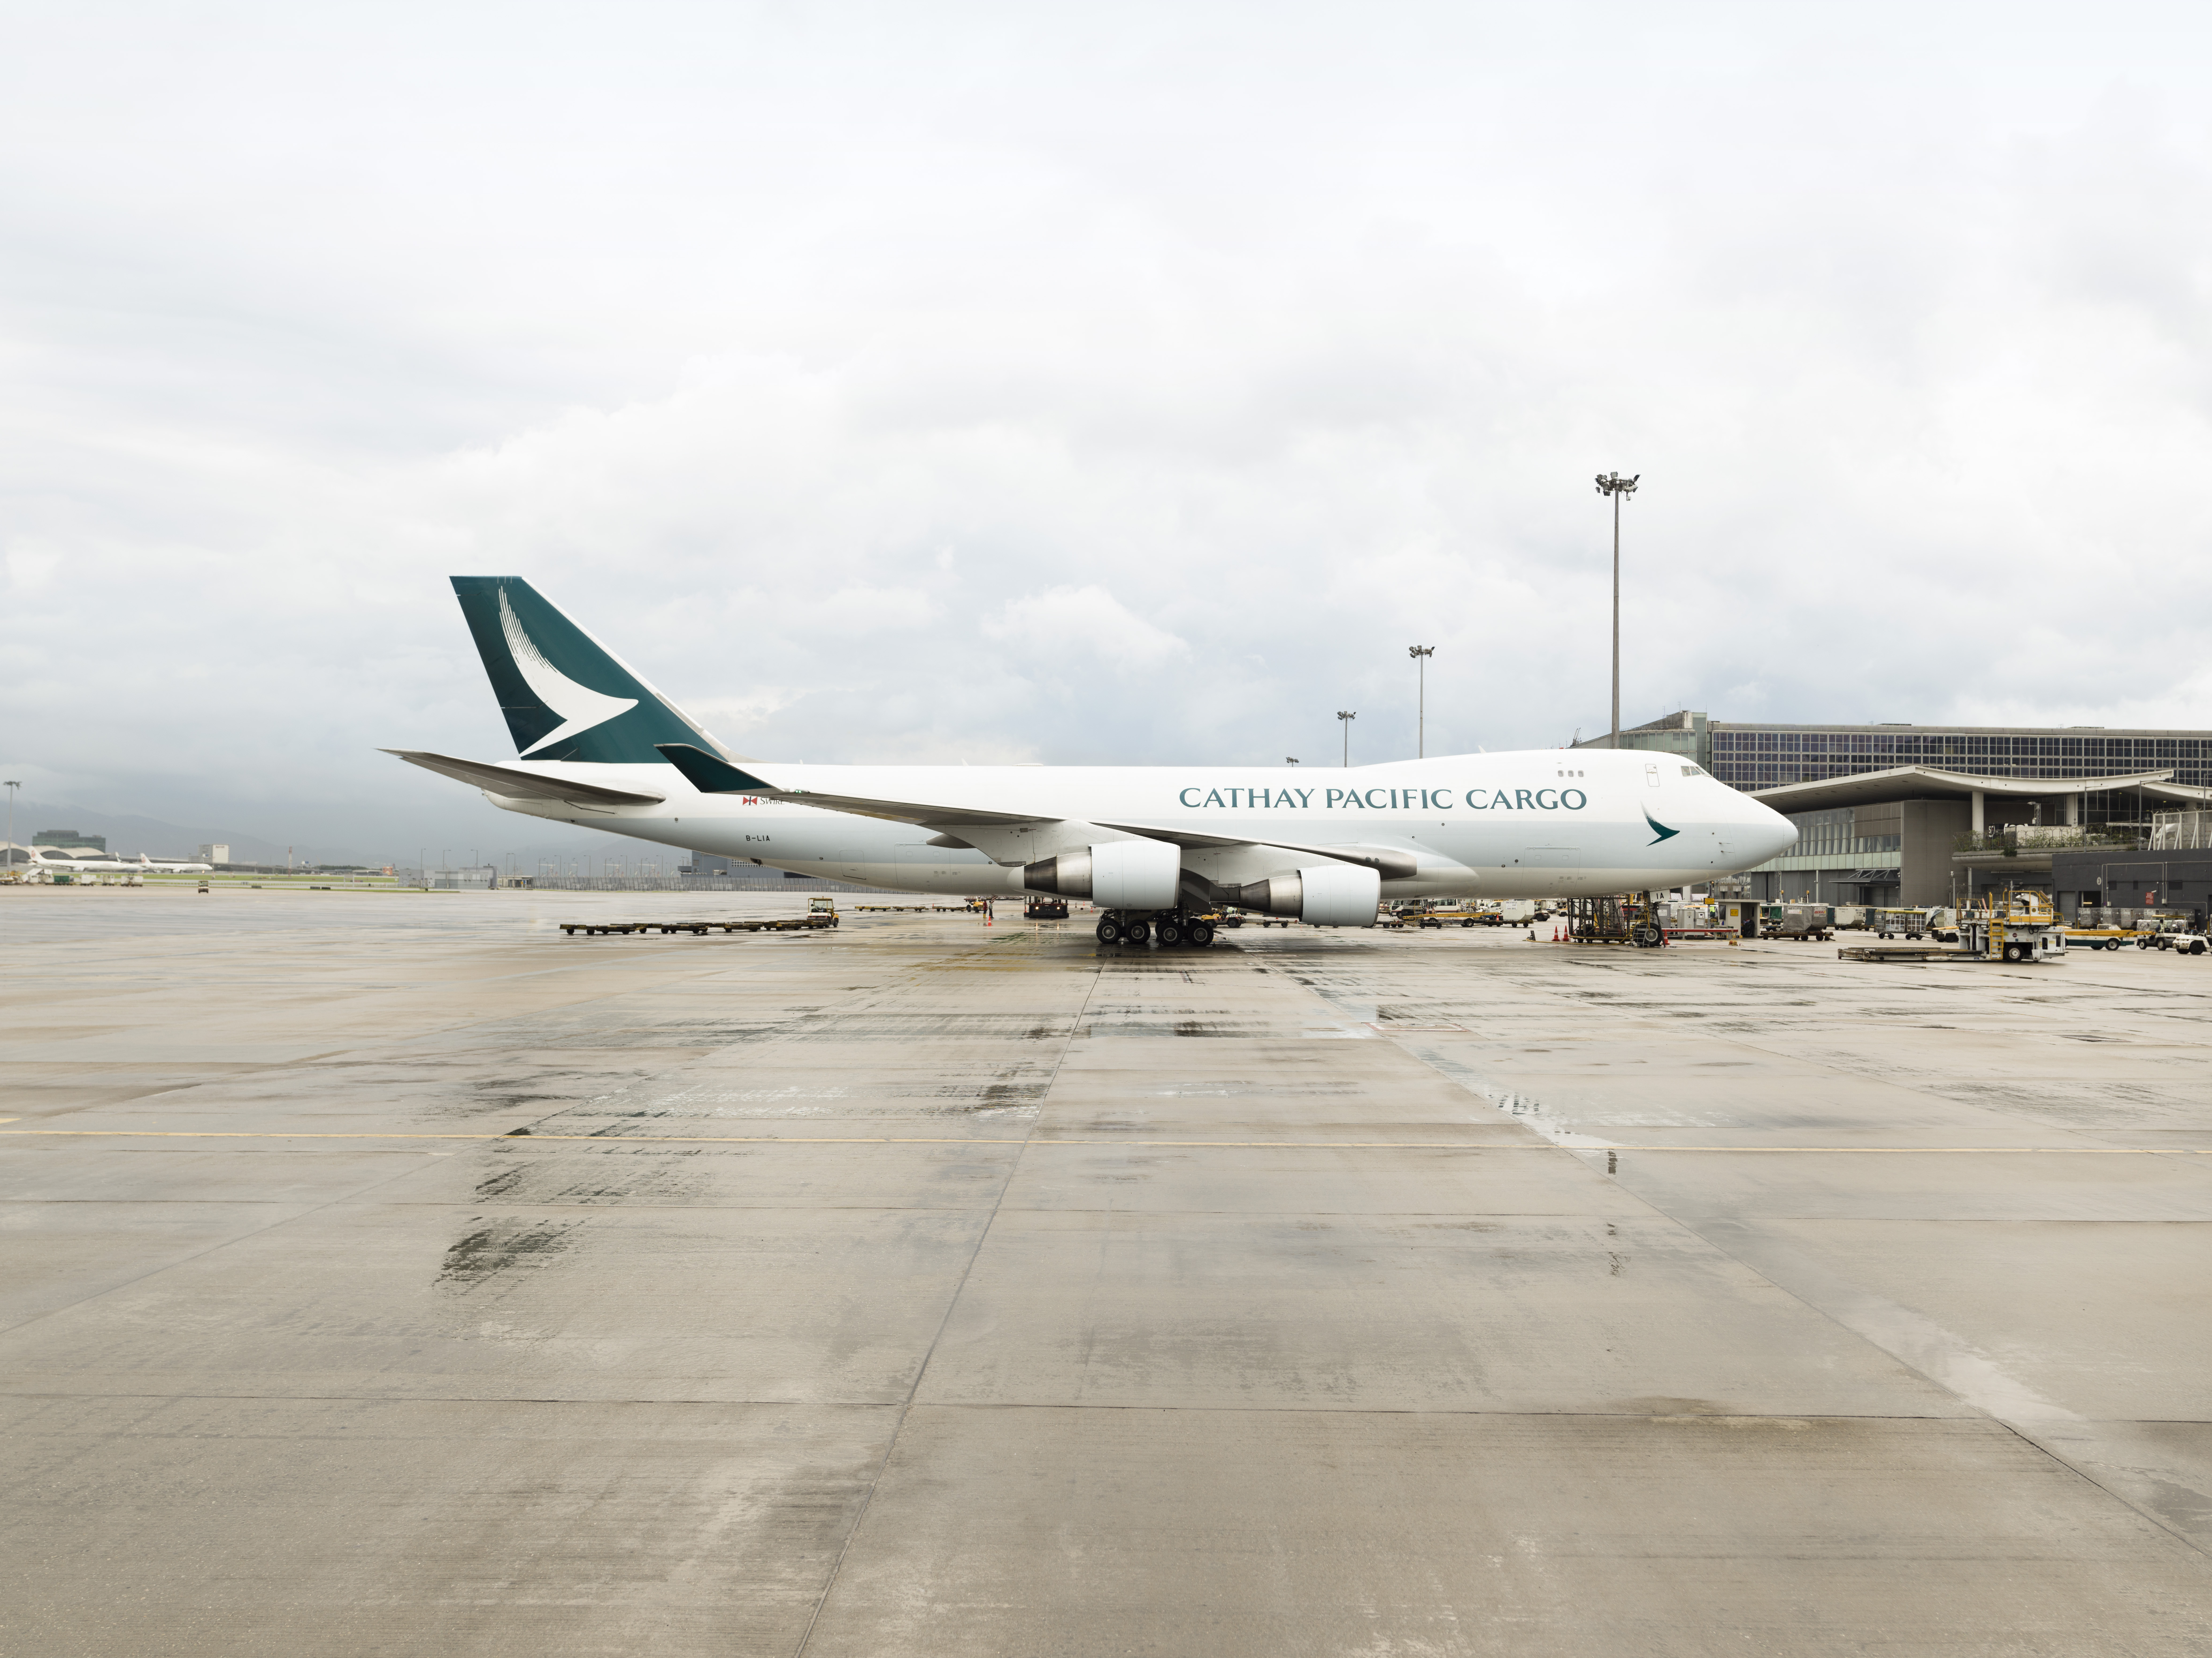 Following its agreement for engine MRO services, Cathay Pacific is likely keeping its fleet of 747-400ERFs for at least five more years. Photo: Cathay Pacific